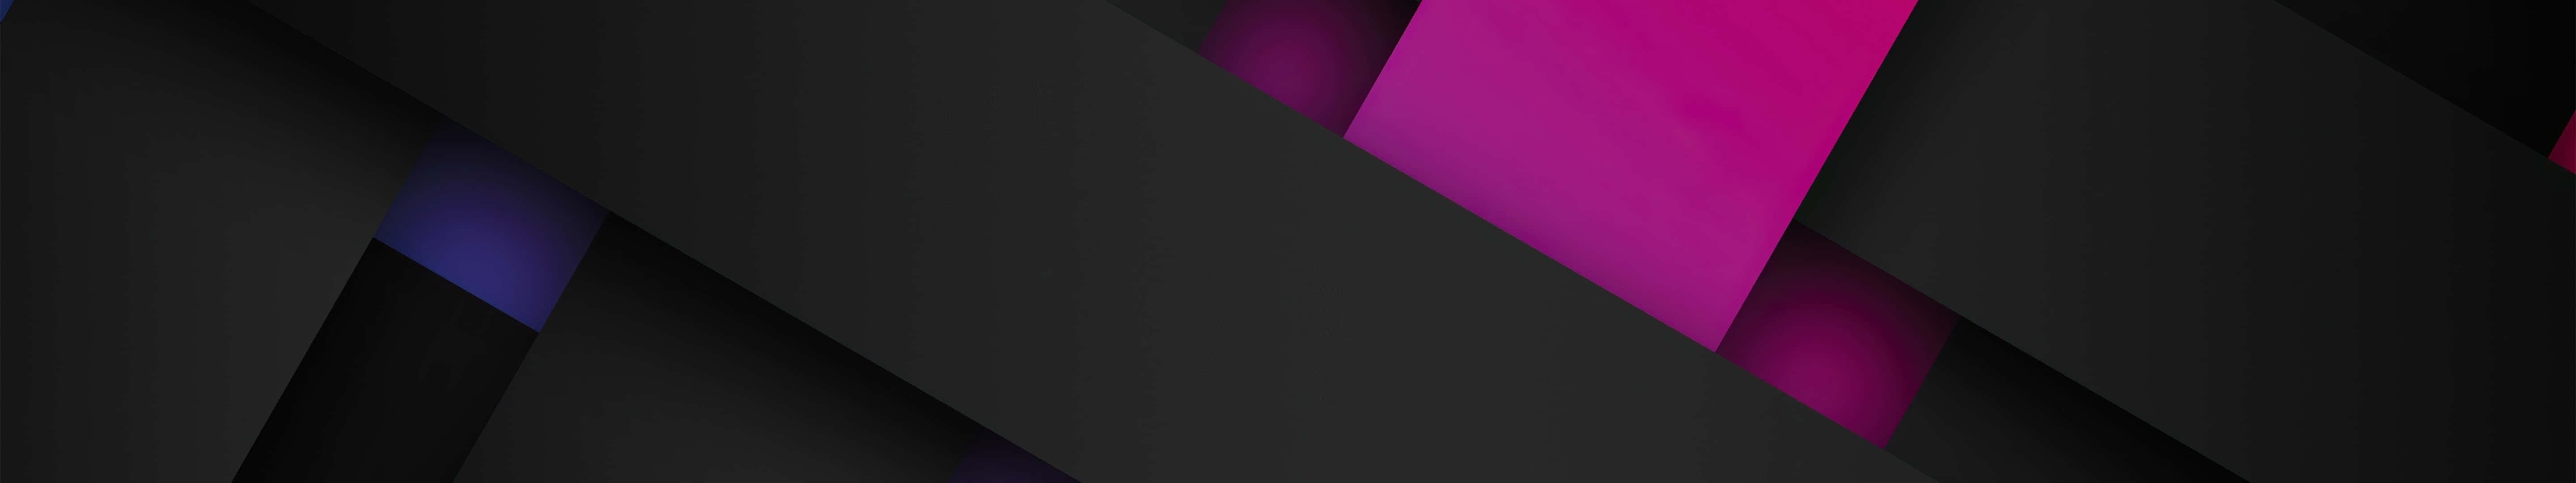 A Black And Purple Abstract Wallpaper With A Black Background